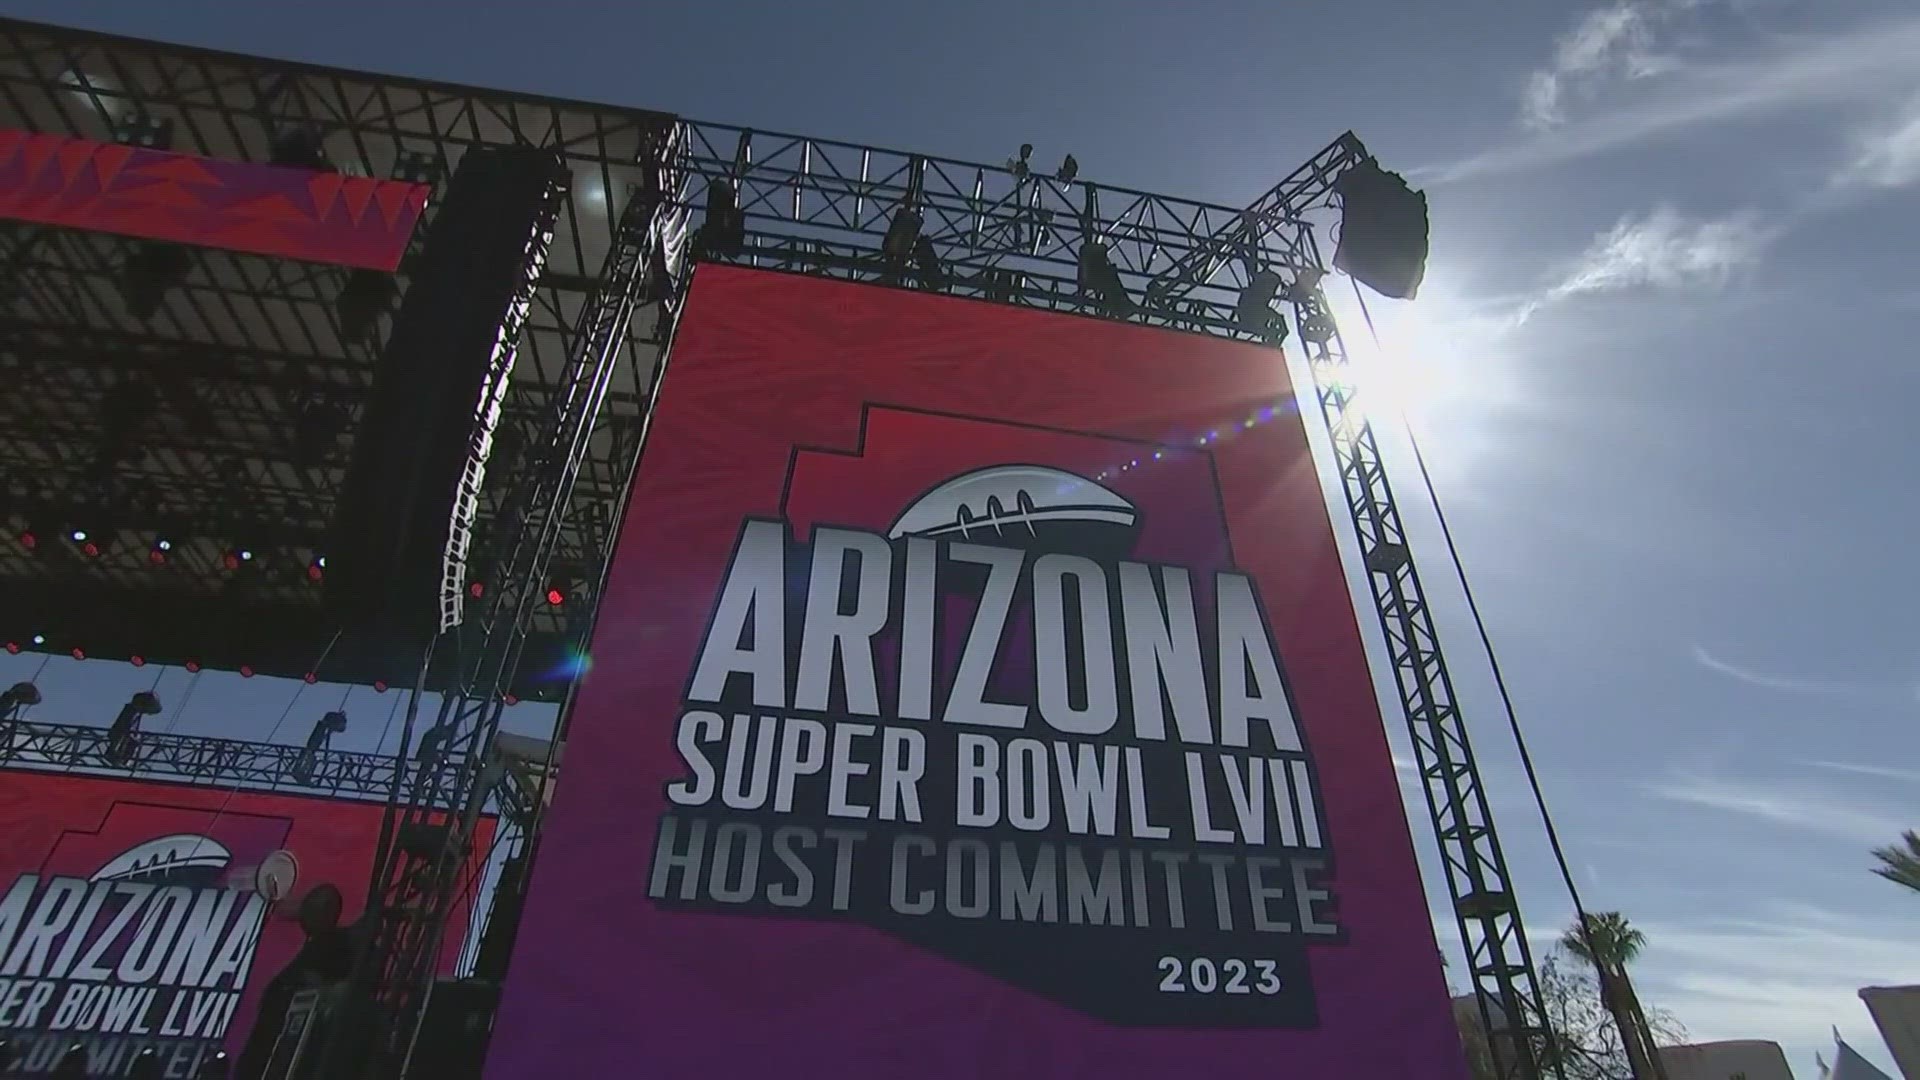 12News Political Insider spoke with sports economist, Dave Berri to discuss what major sporting events like the Super Bowl and Final Four are doing for the Valley.